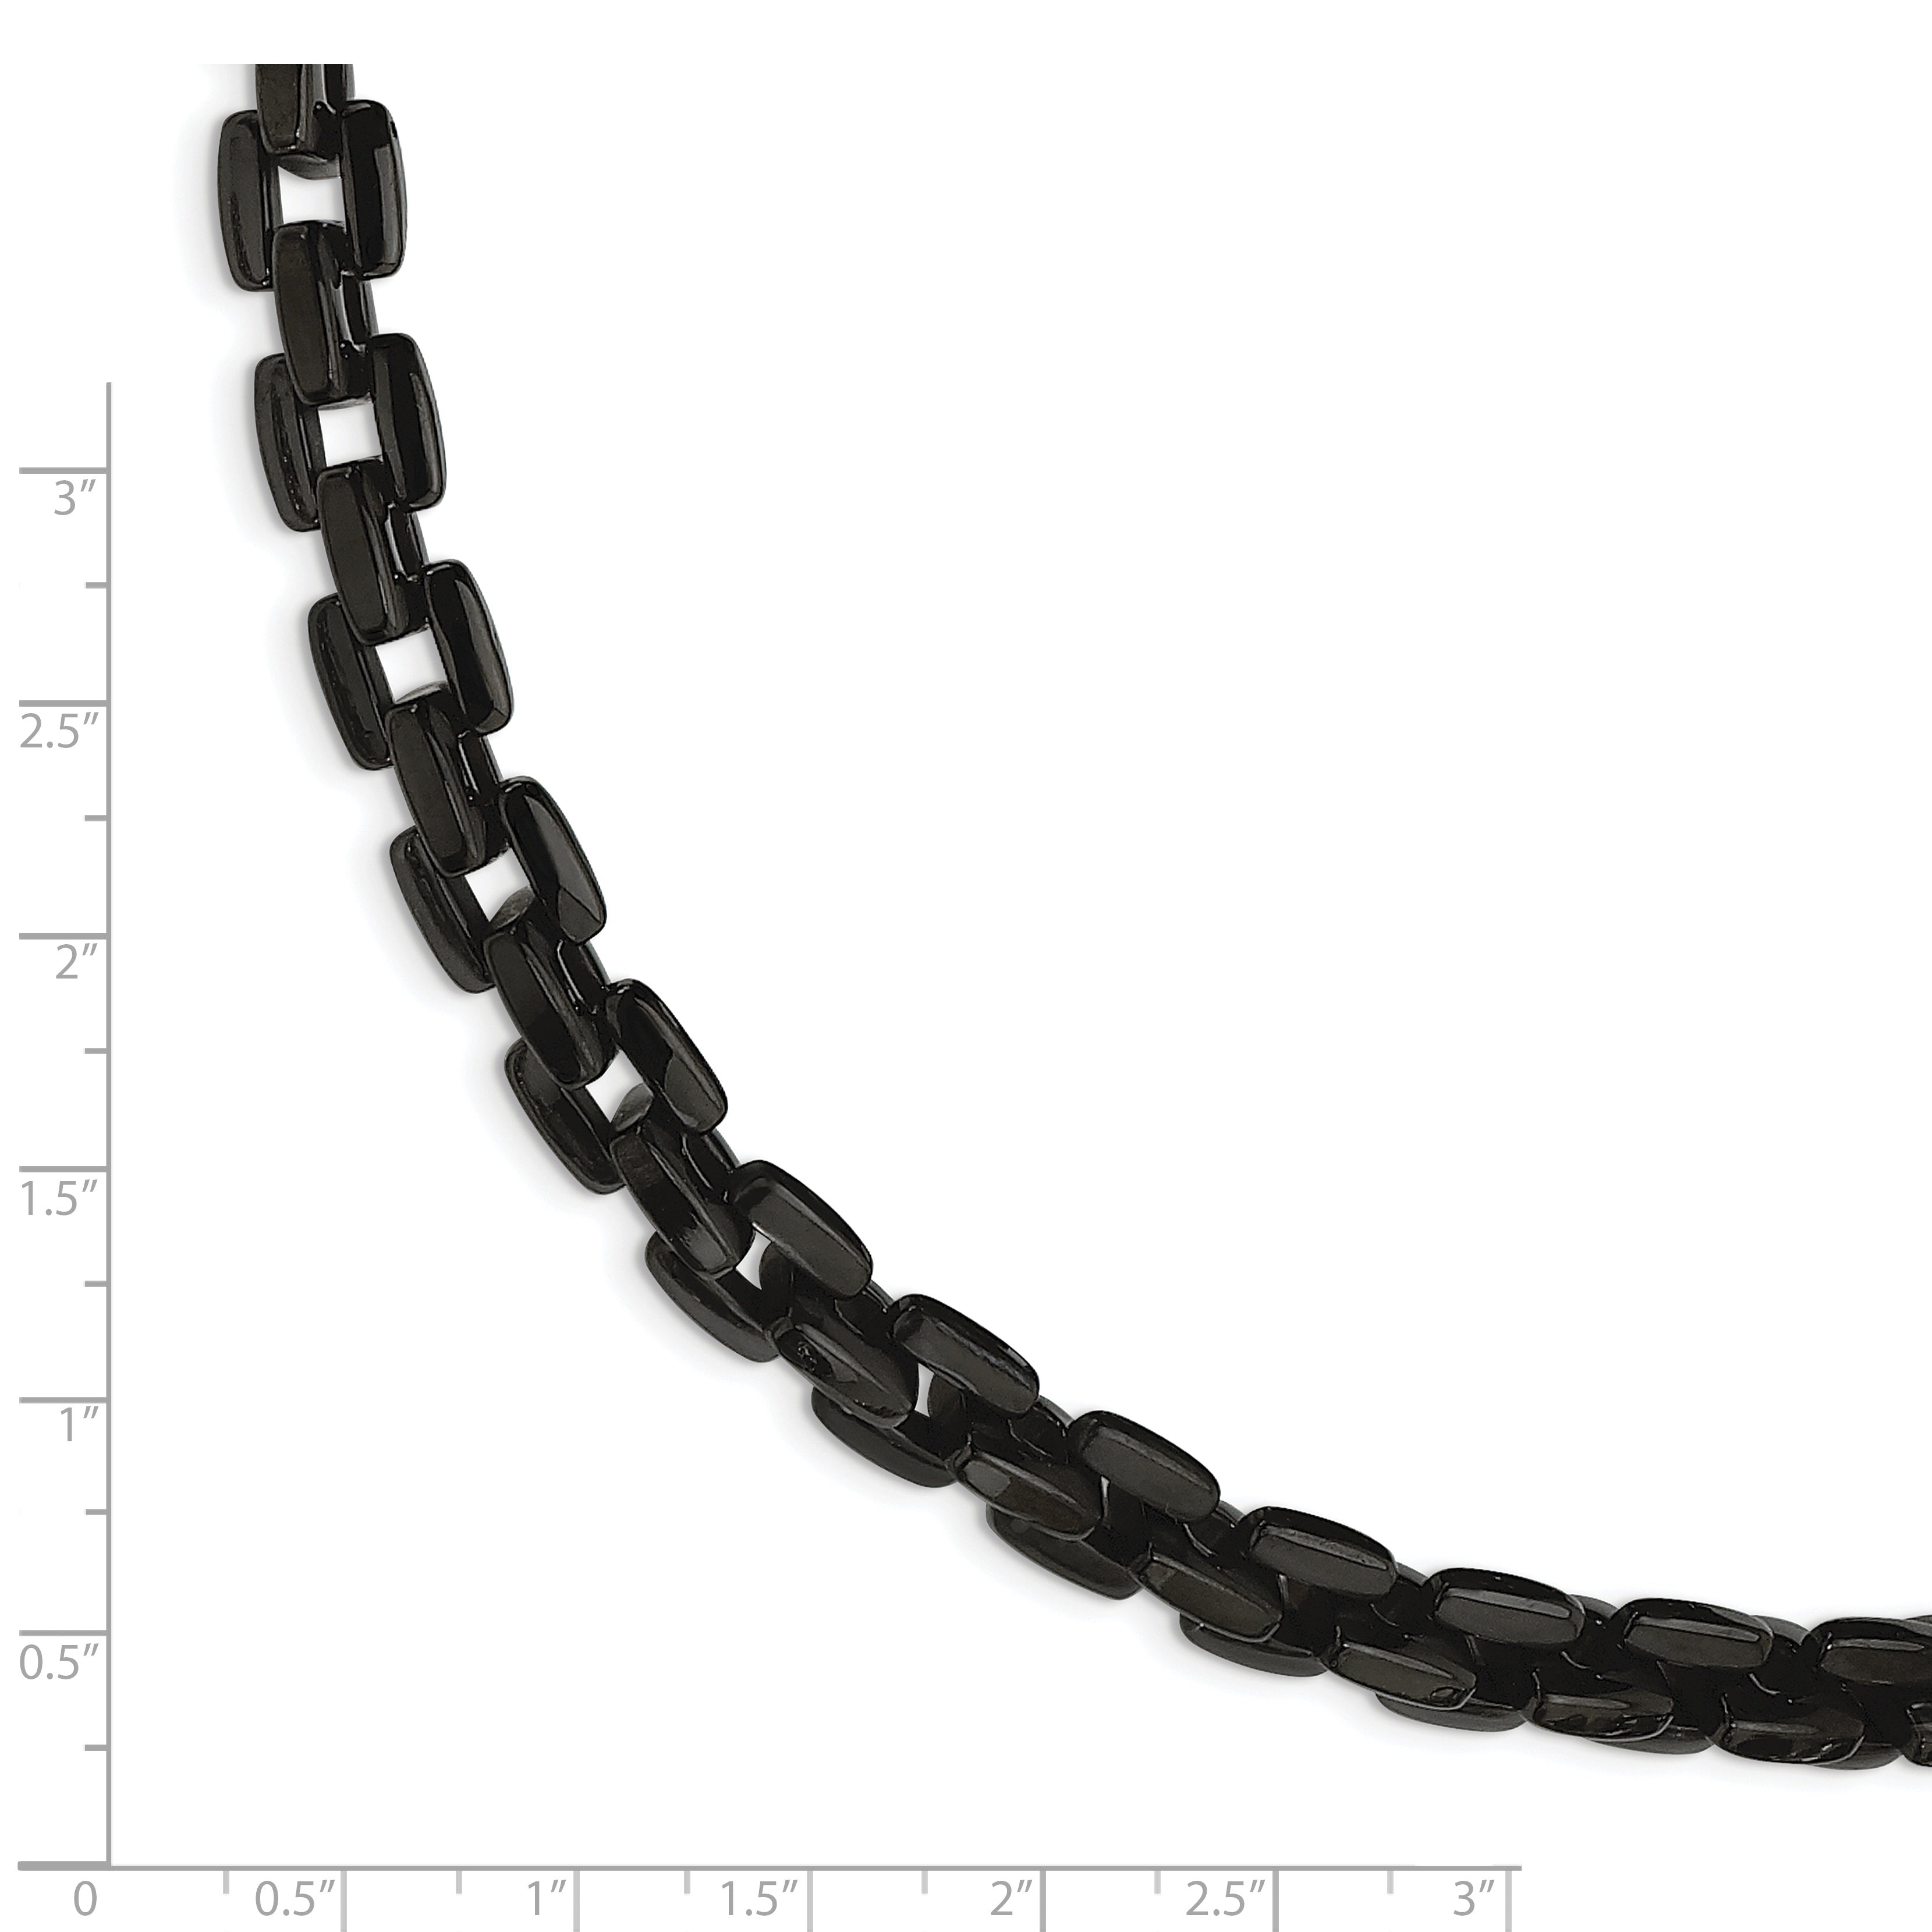 Chisel Stainless Steel Polished Black IP-plated 9 inch Bracelet